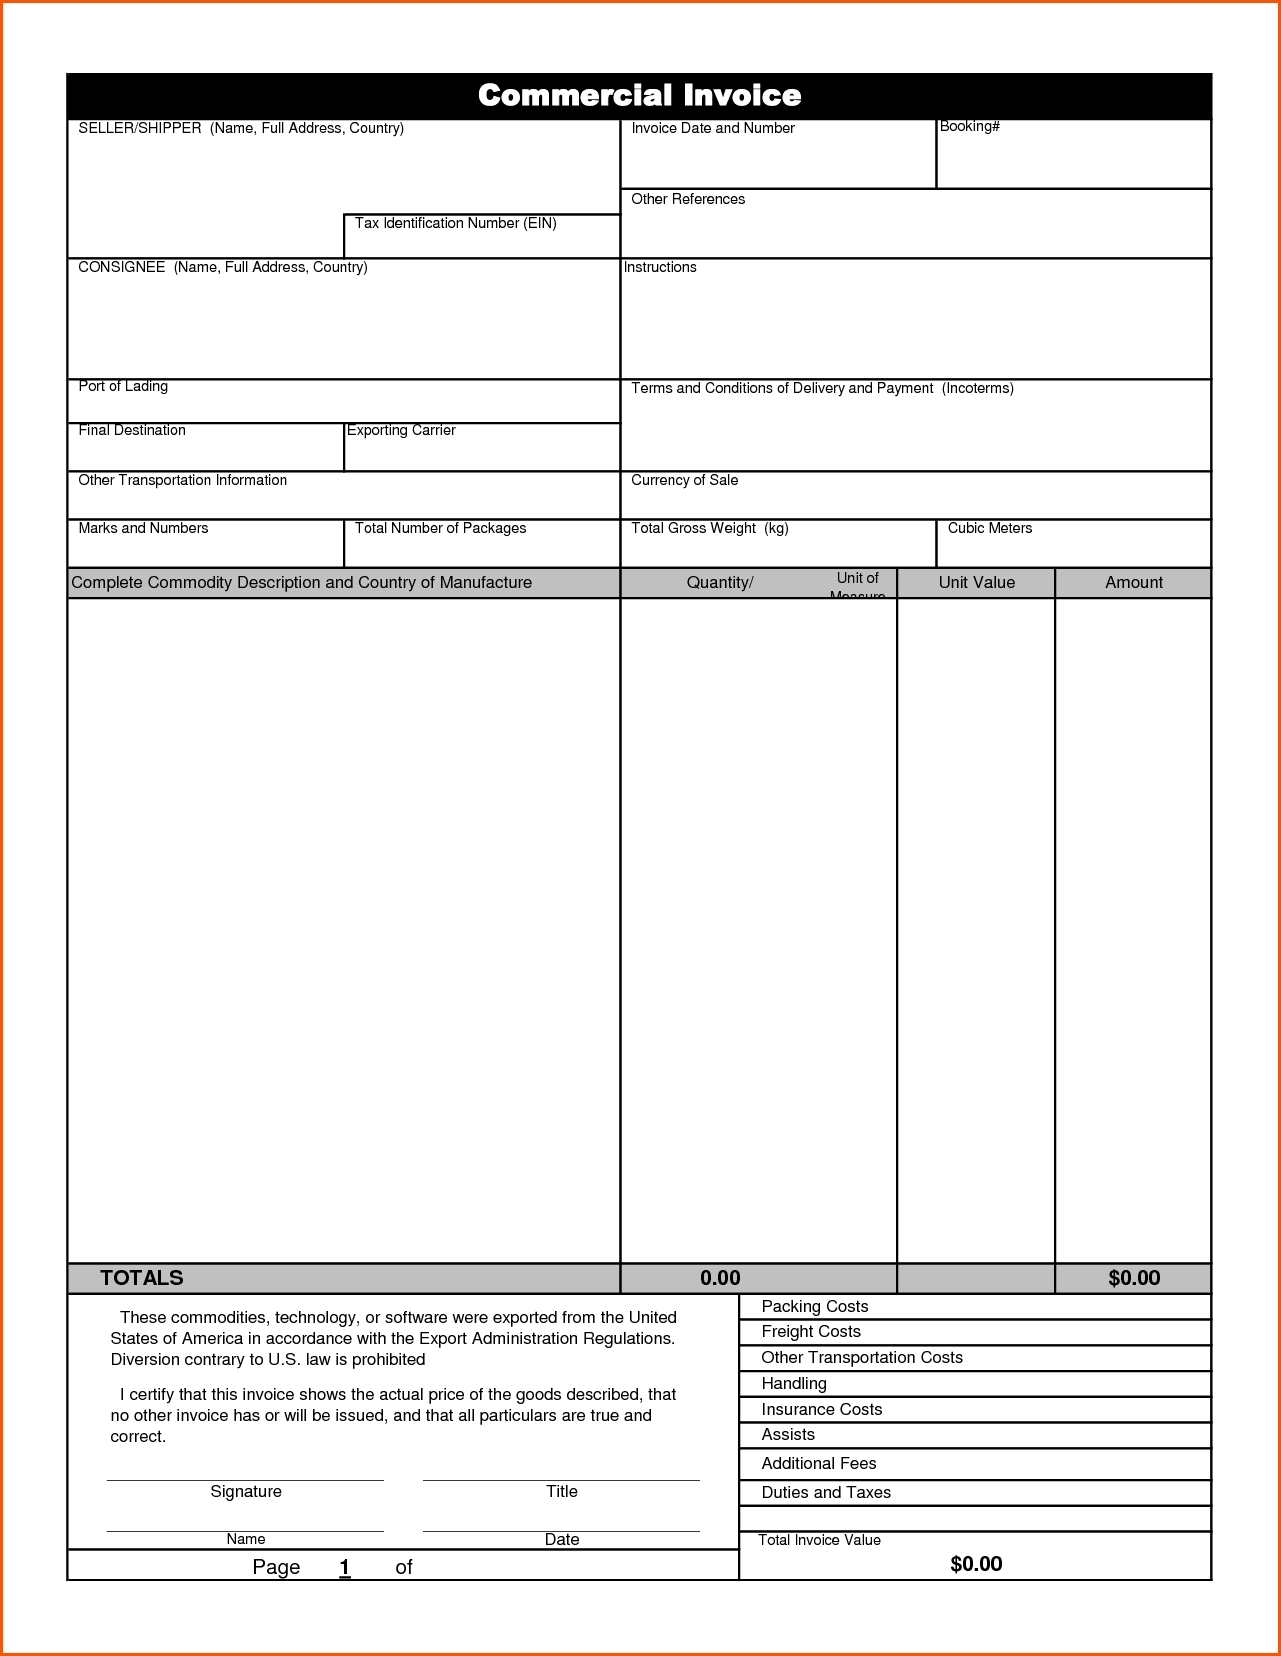 commercial invoice excel template invoice template ideas commercial invoice excel